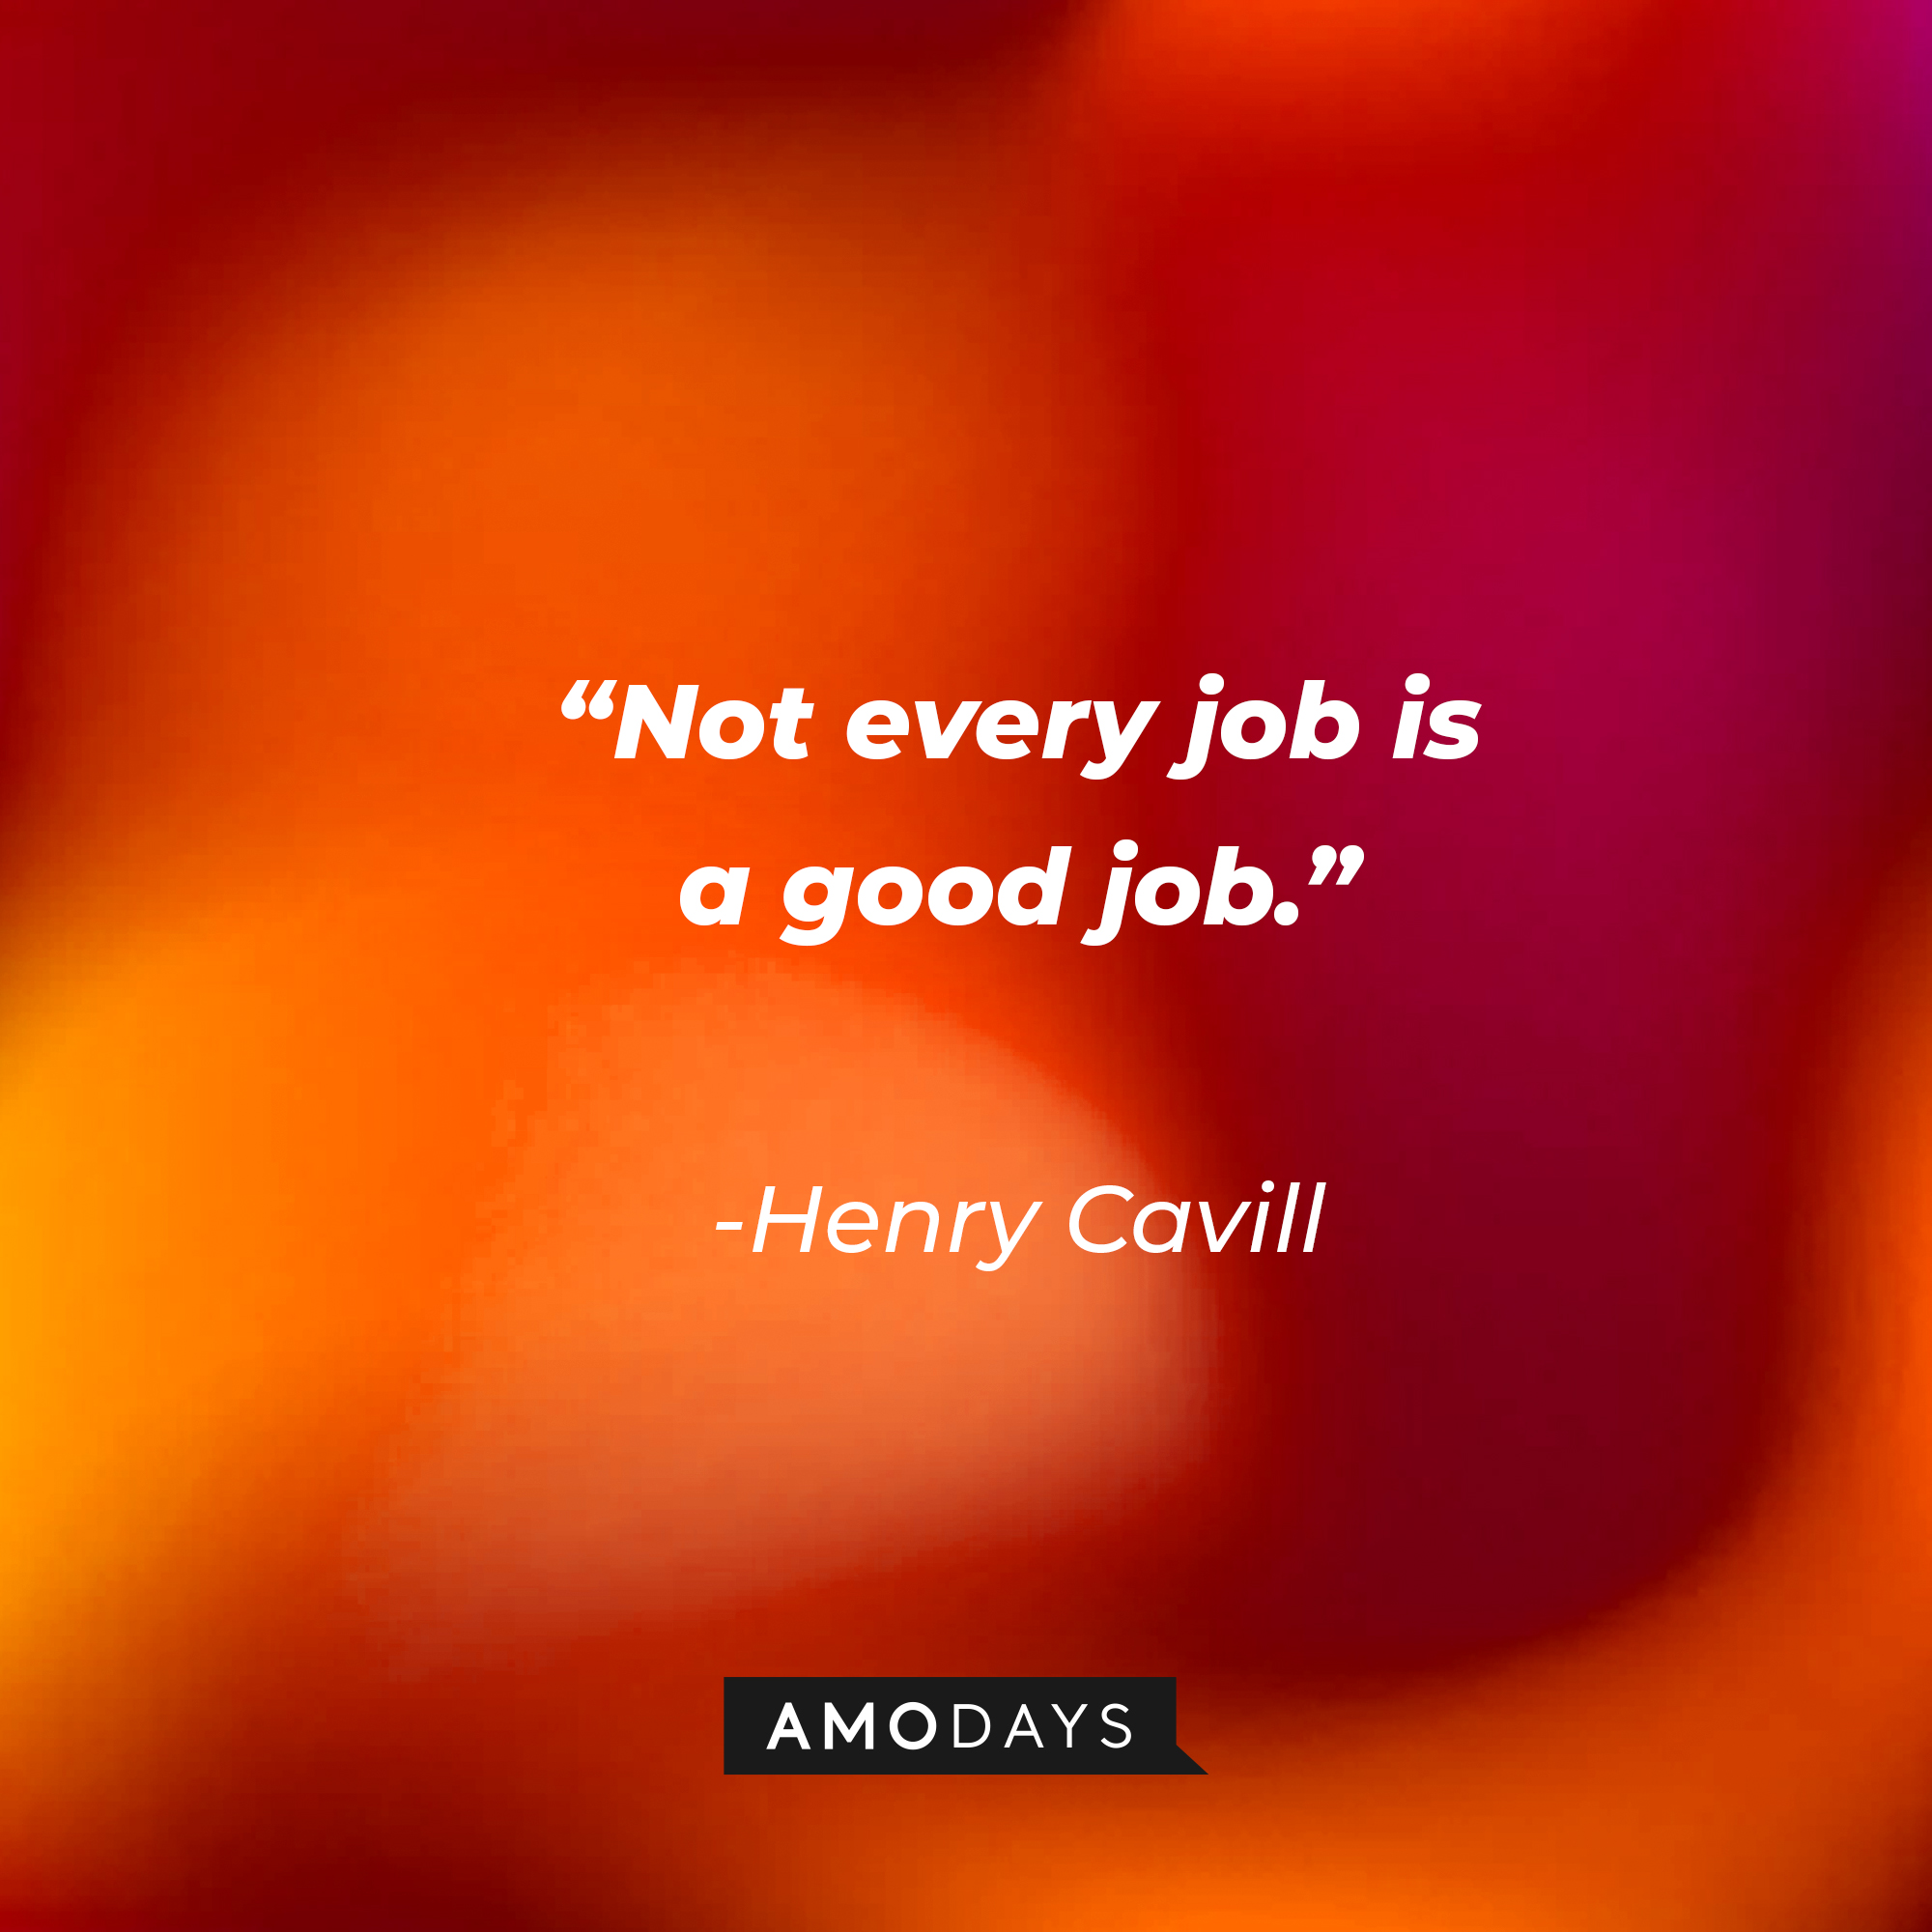 Henry Cavill’s quote: “Not every job is a good job.” | Source: AmoDays